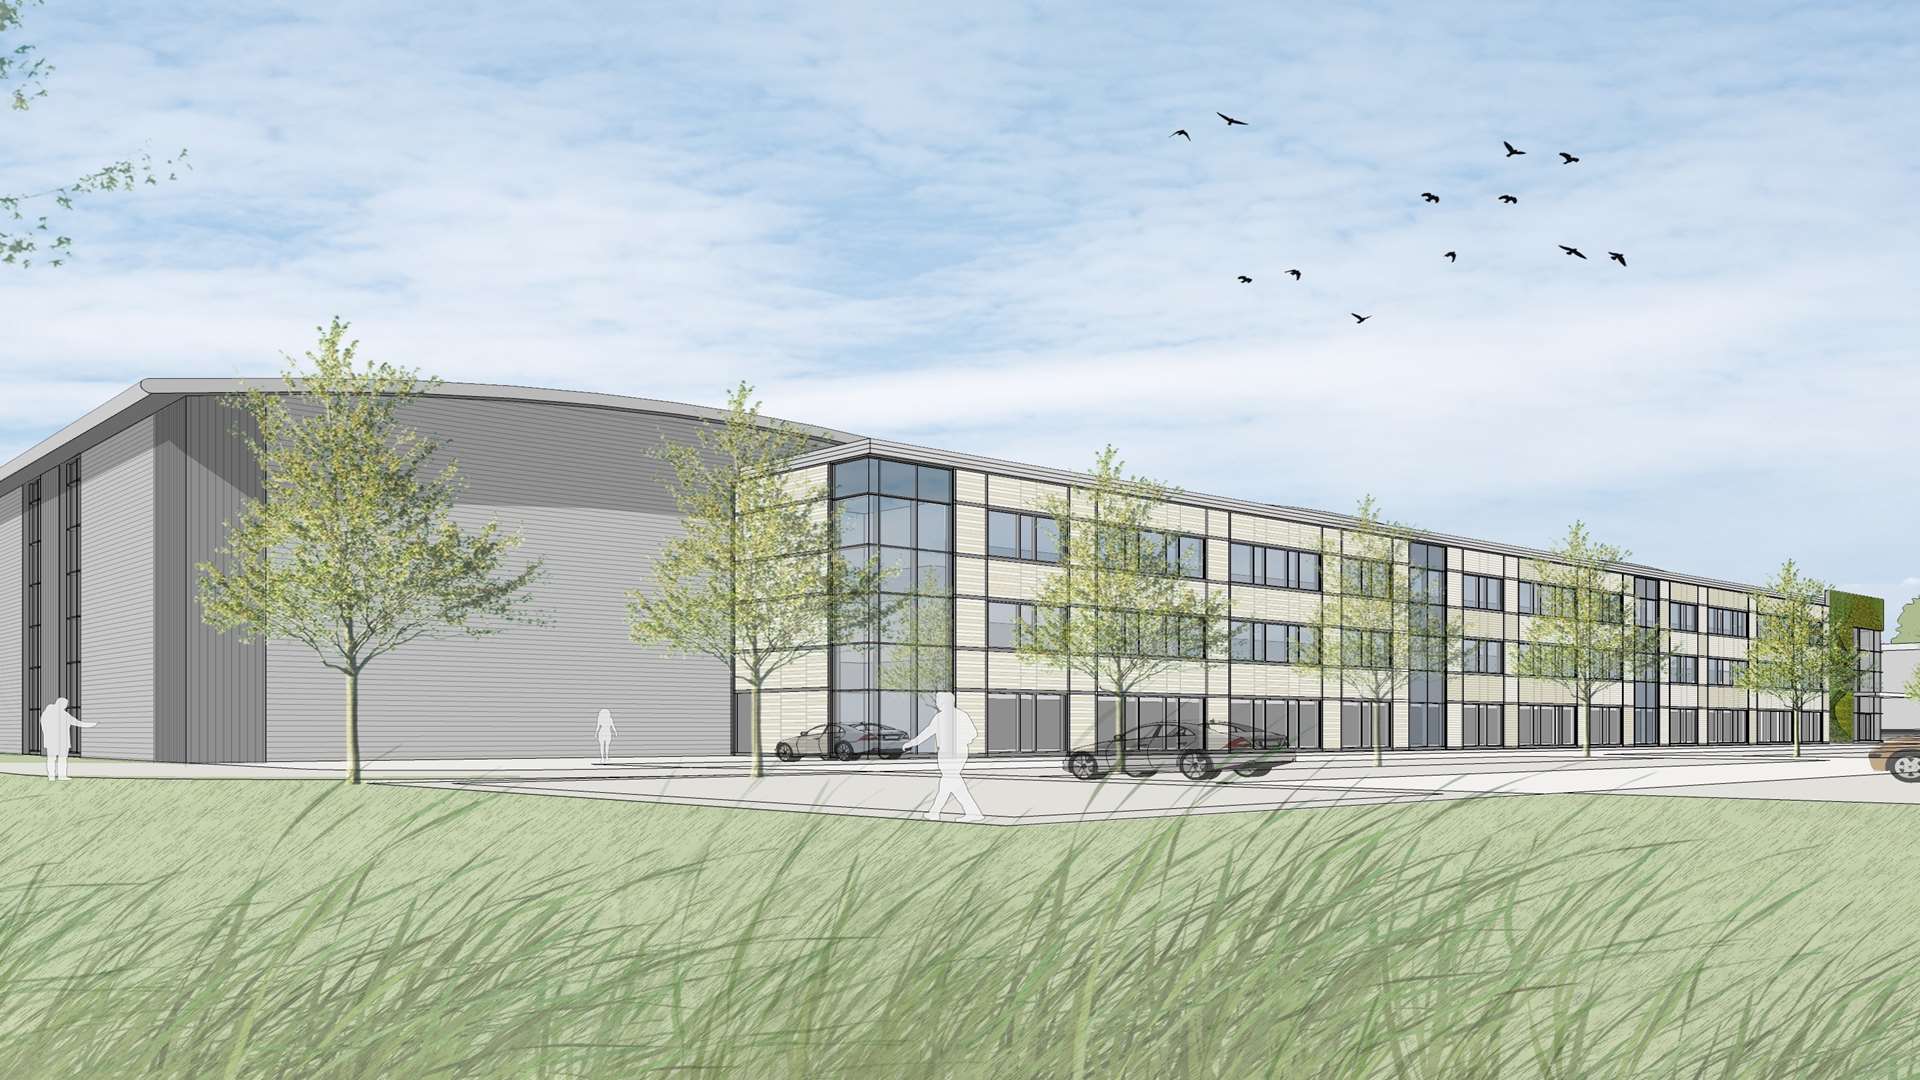 An artist's impression of one of the proposed new buildings at Waterside Park